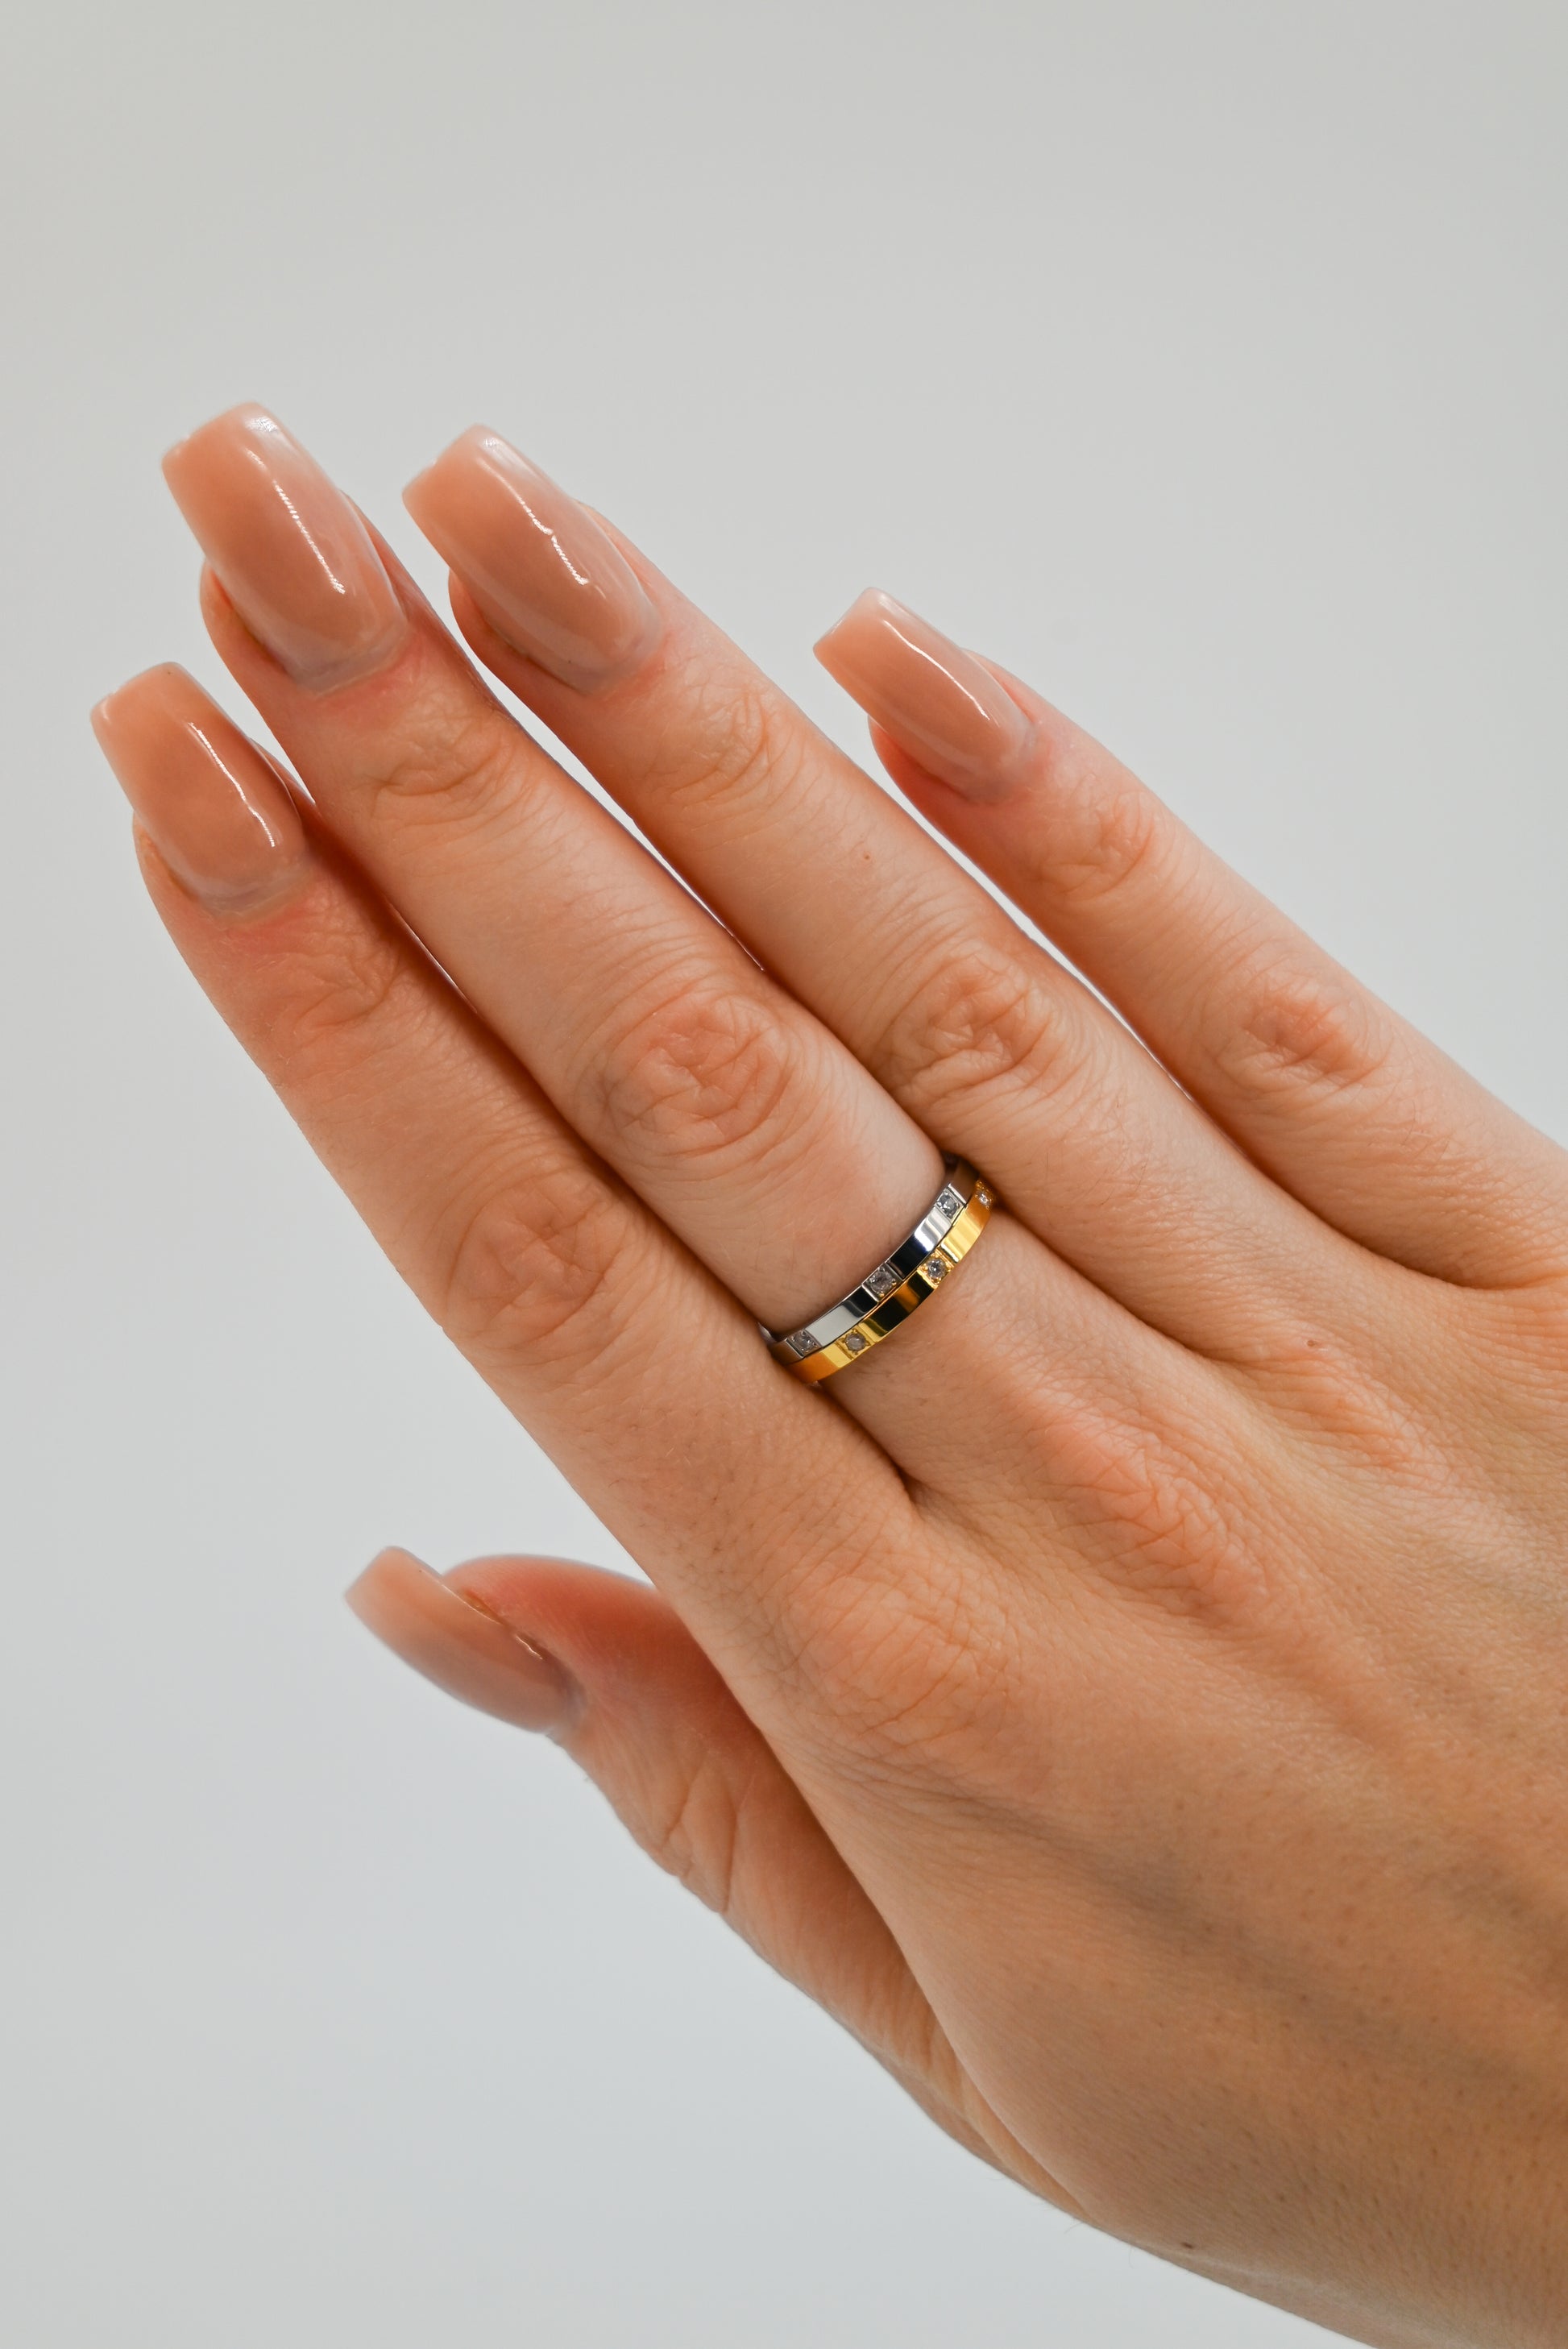 Cartier style ring in gold and silver on hand